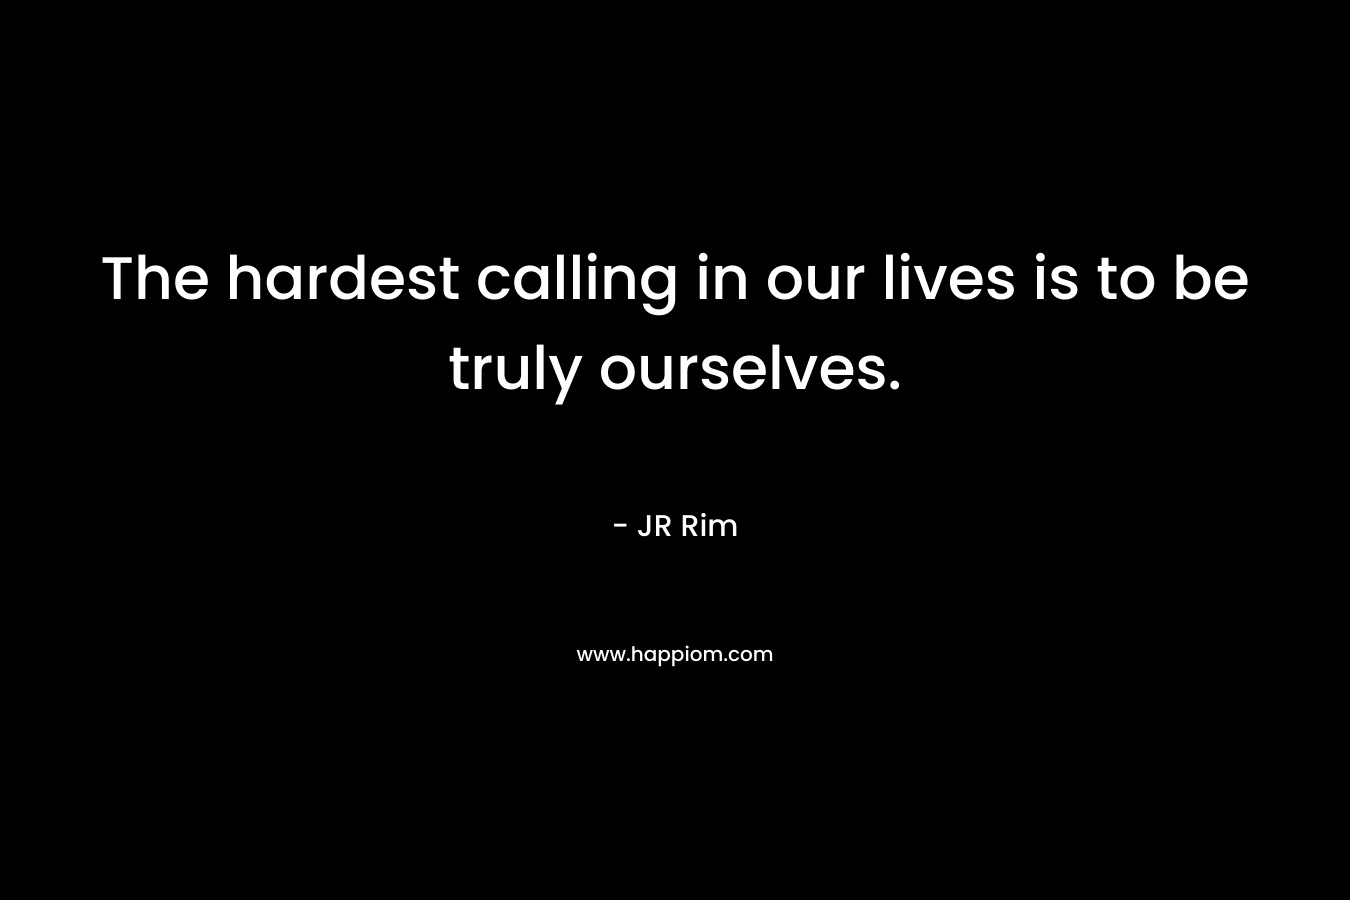 The hardest calling in our lives is to be truly ourselves.